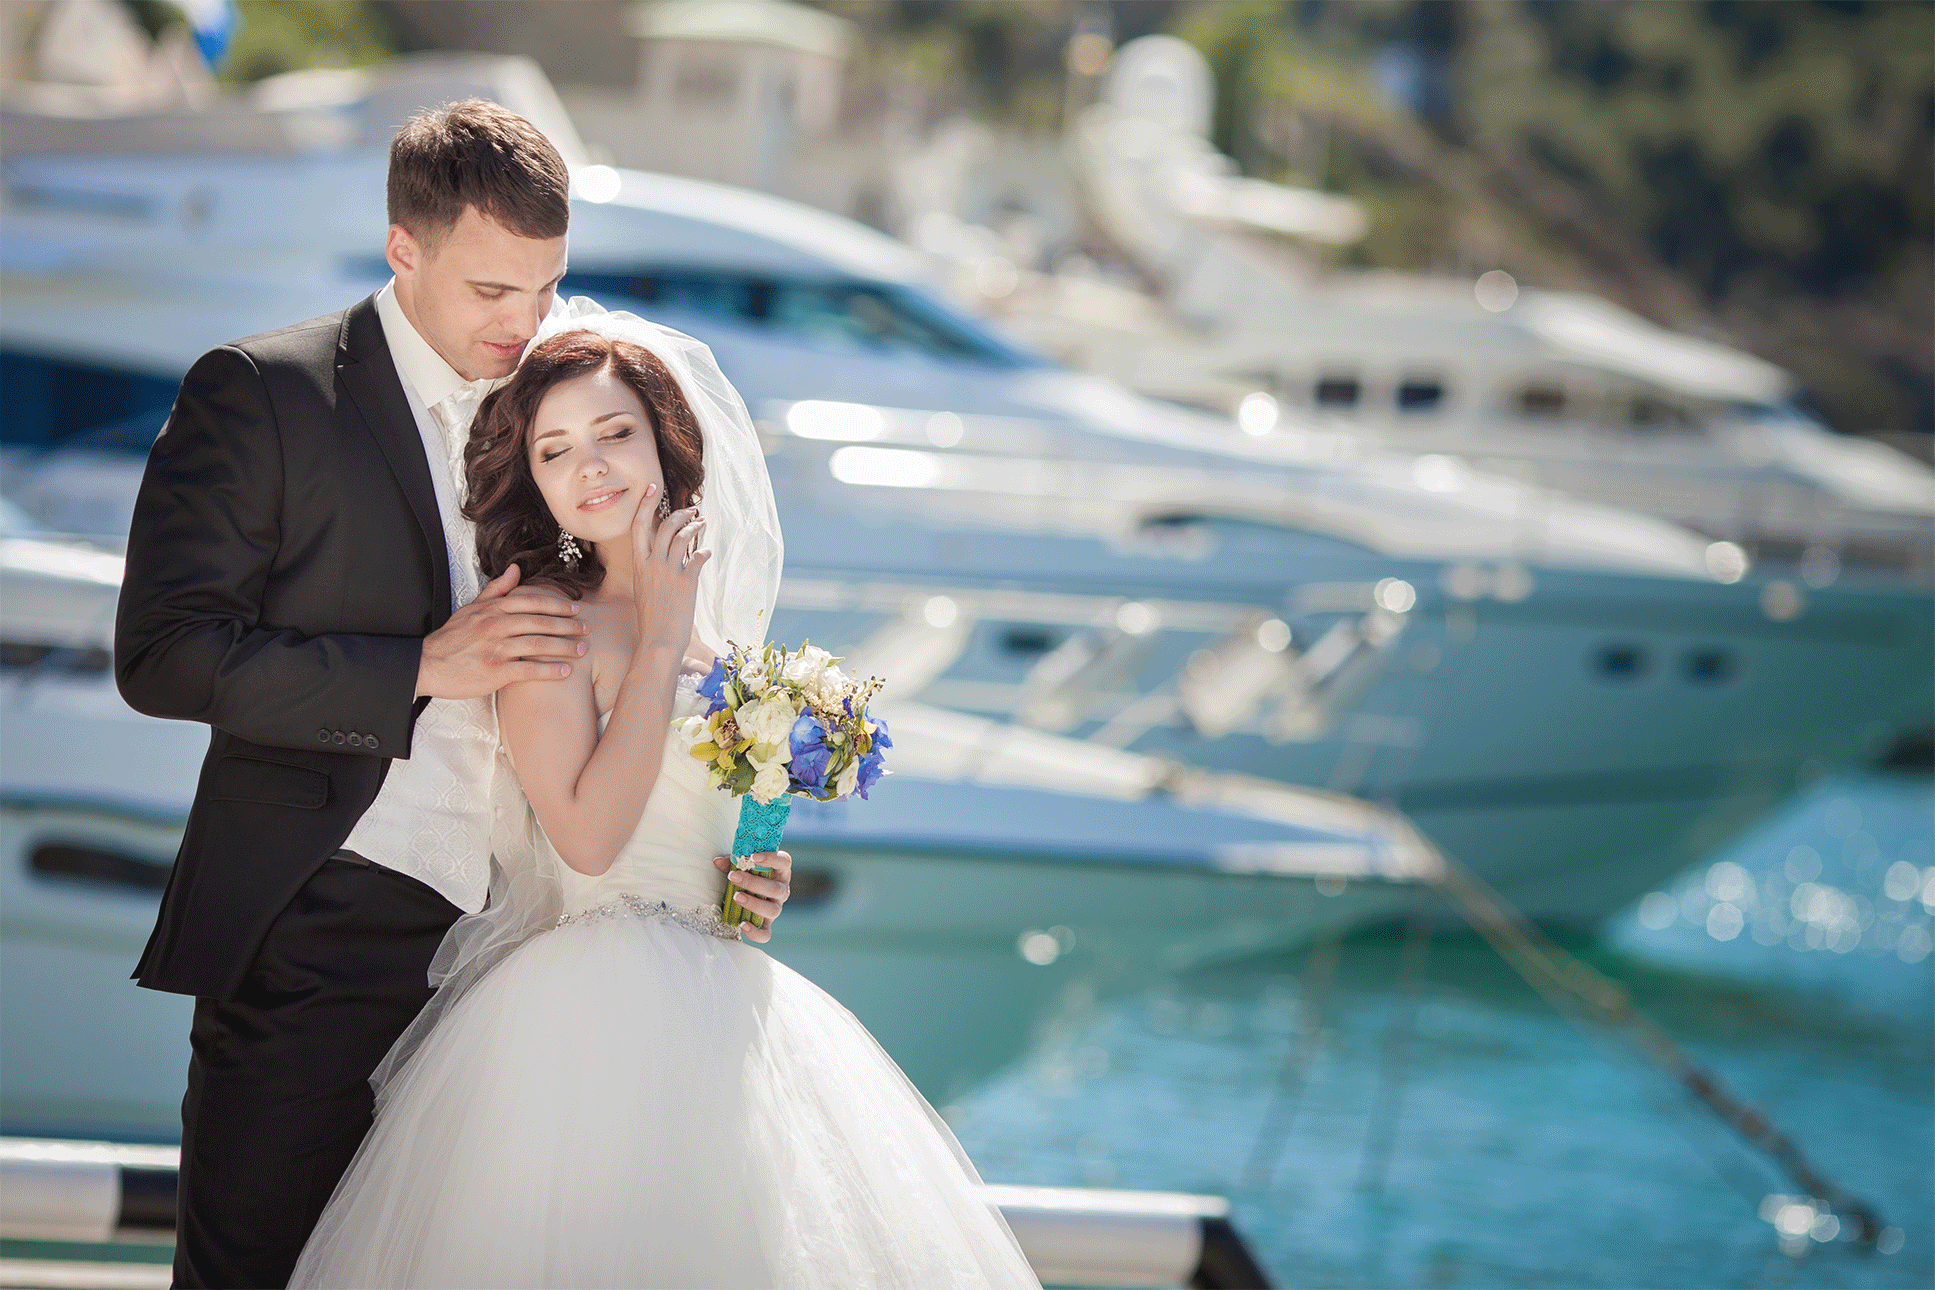 Book your wedding day in WIND OF FORTUNE